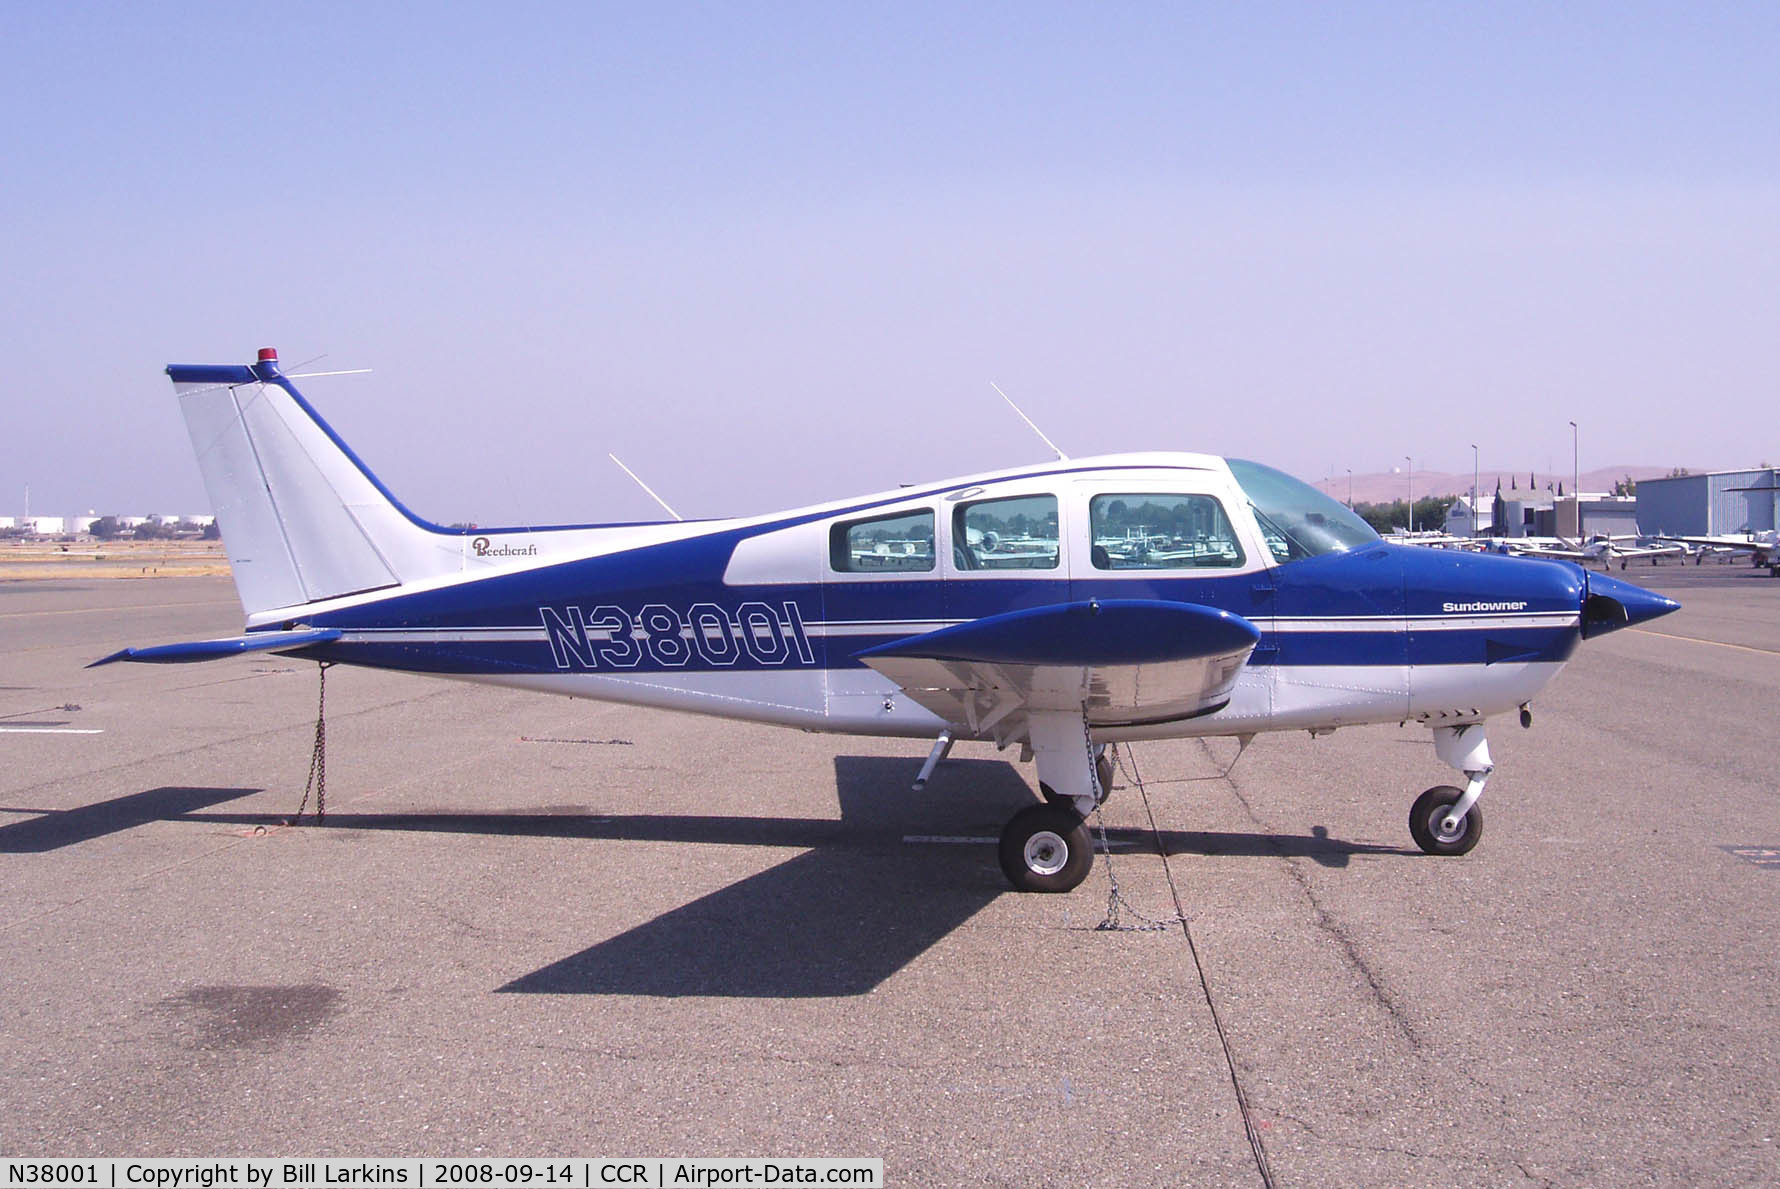 N38001, 1980 Beech C23 Sundowner 180 C/N M-2298, Colorful visitor from Chico.